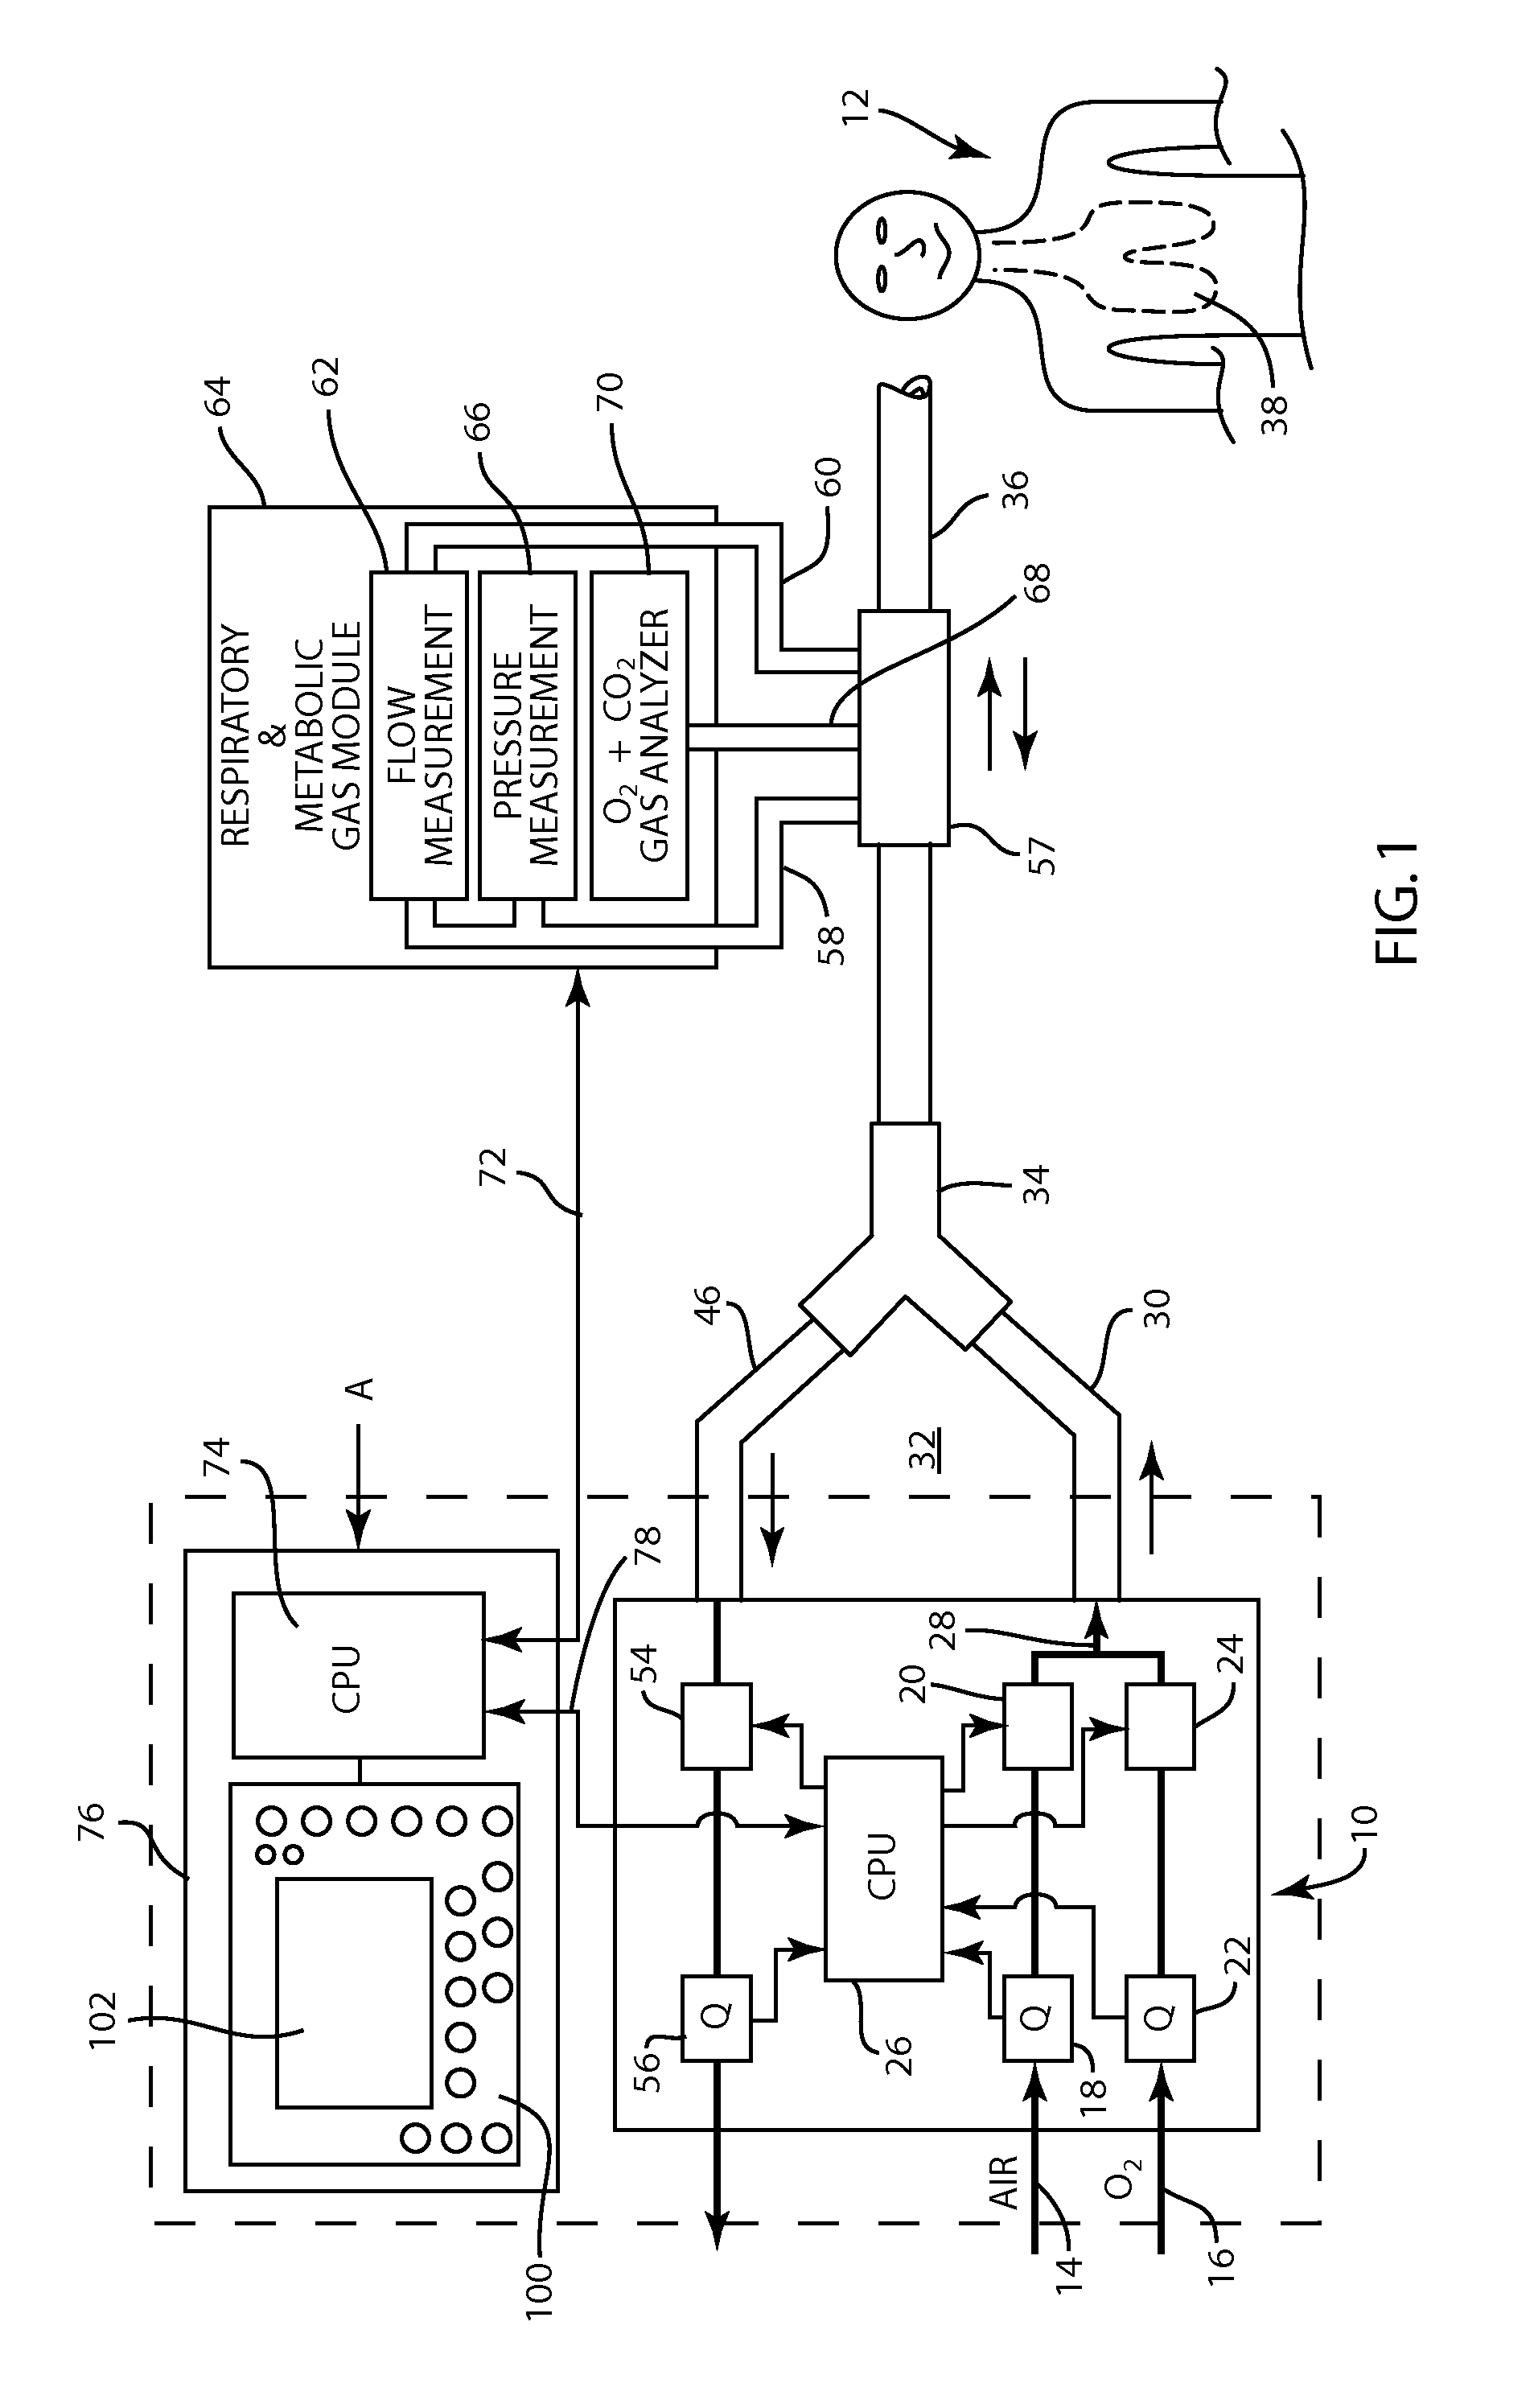 Apparatus and Method for Identifying FRC and PEEP Characteristics